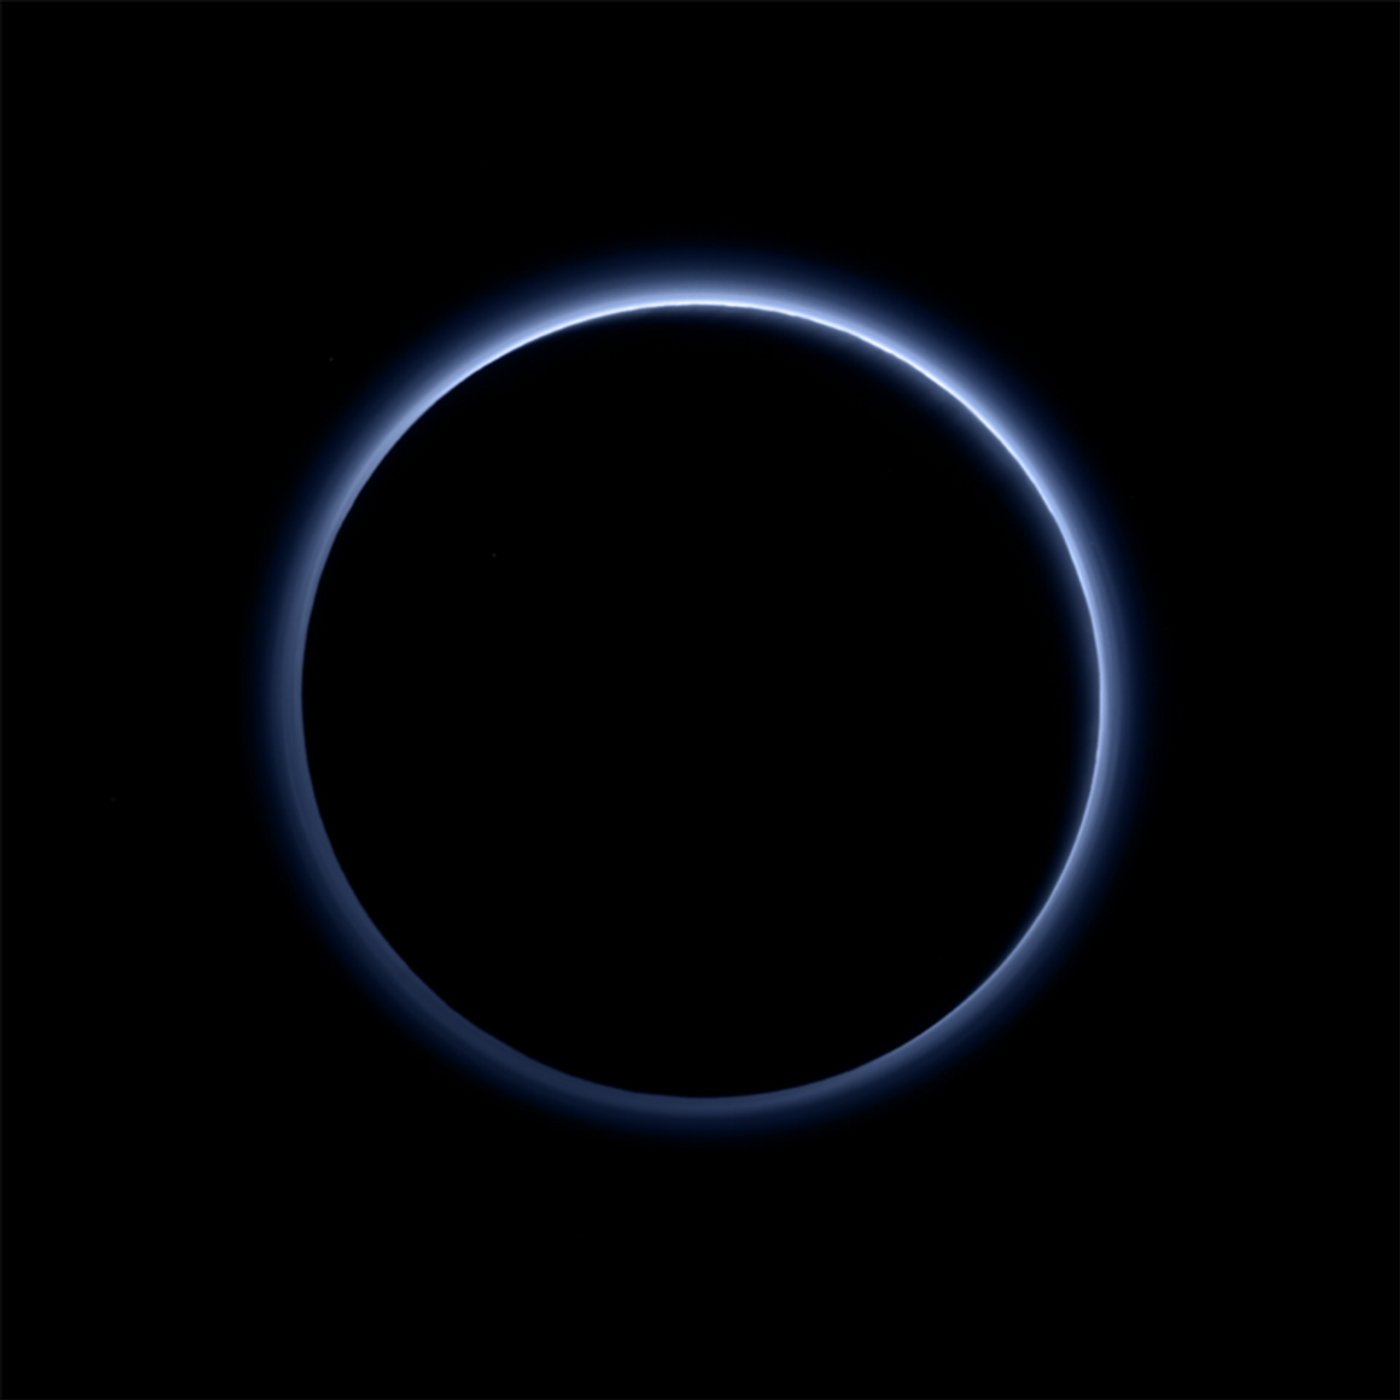 Pluto's atmosphere gives off a blue haze.